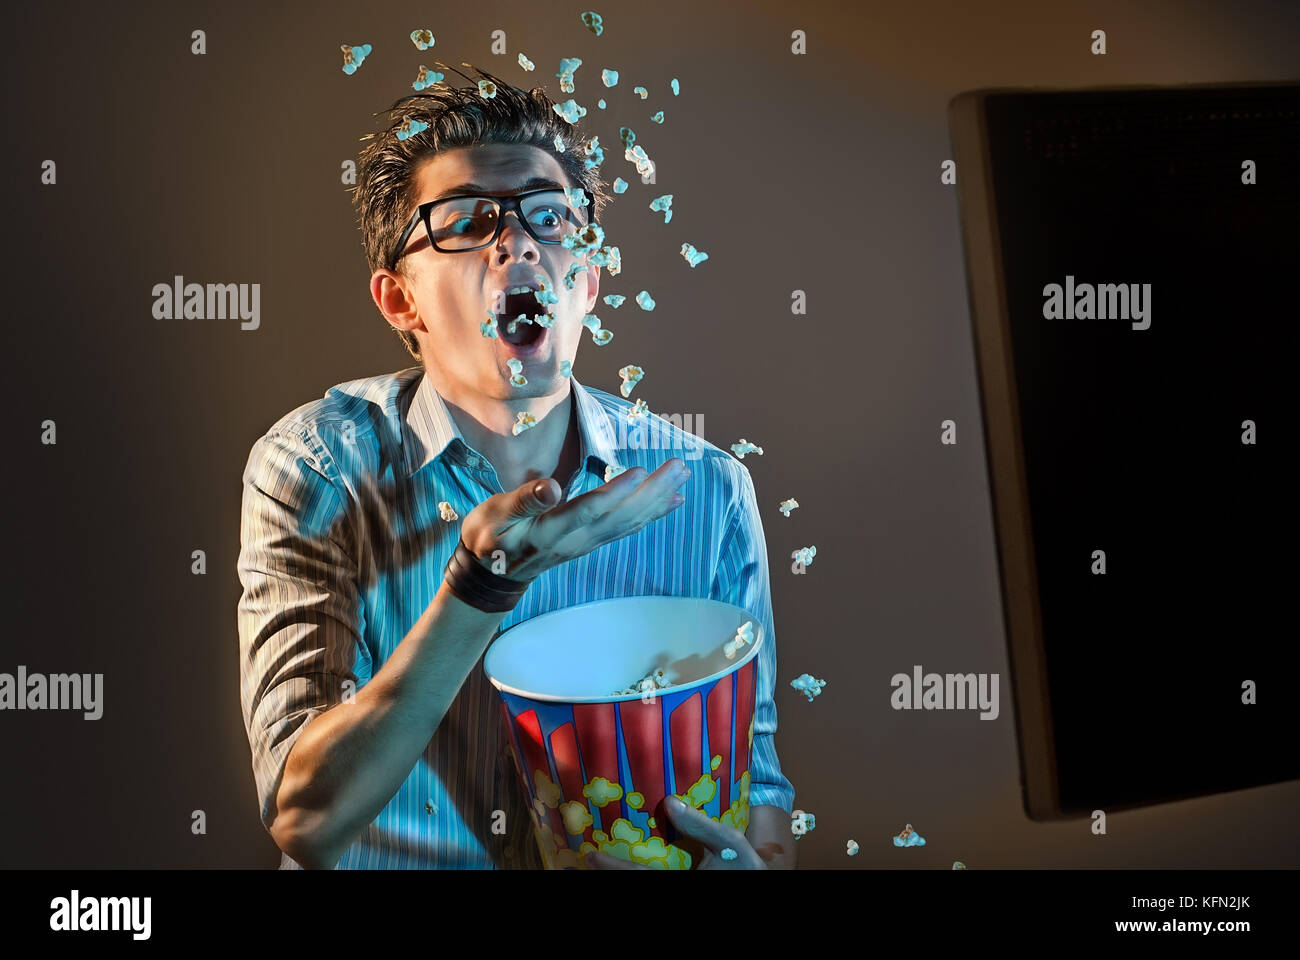 A man watches the movie alone in the glasses and eats popcorn Stock Photo